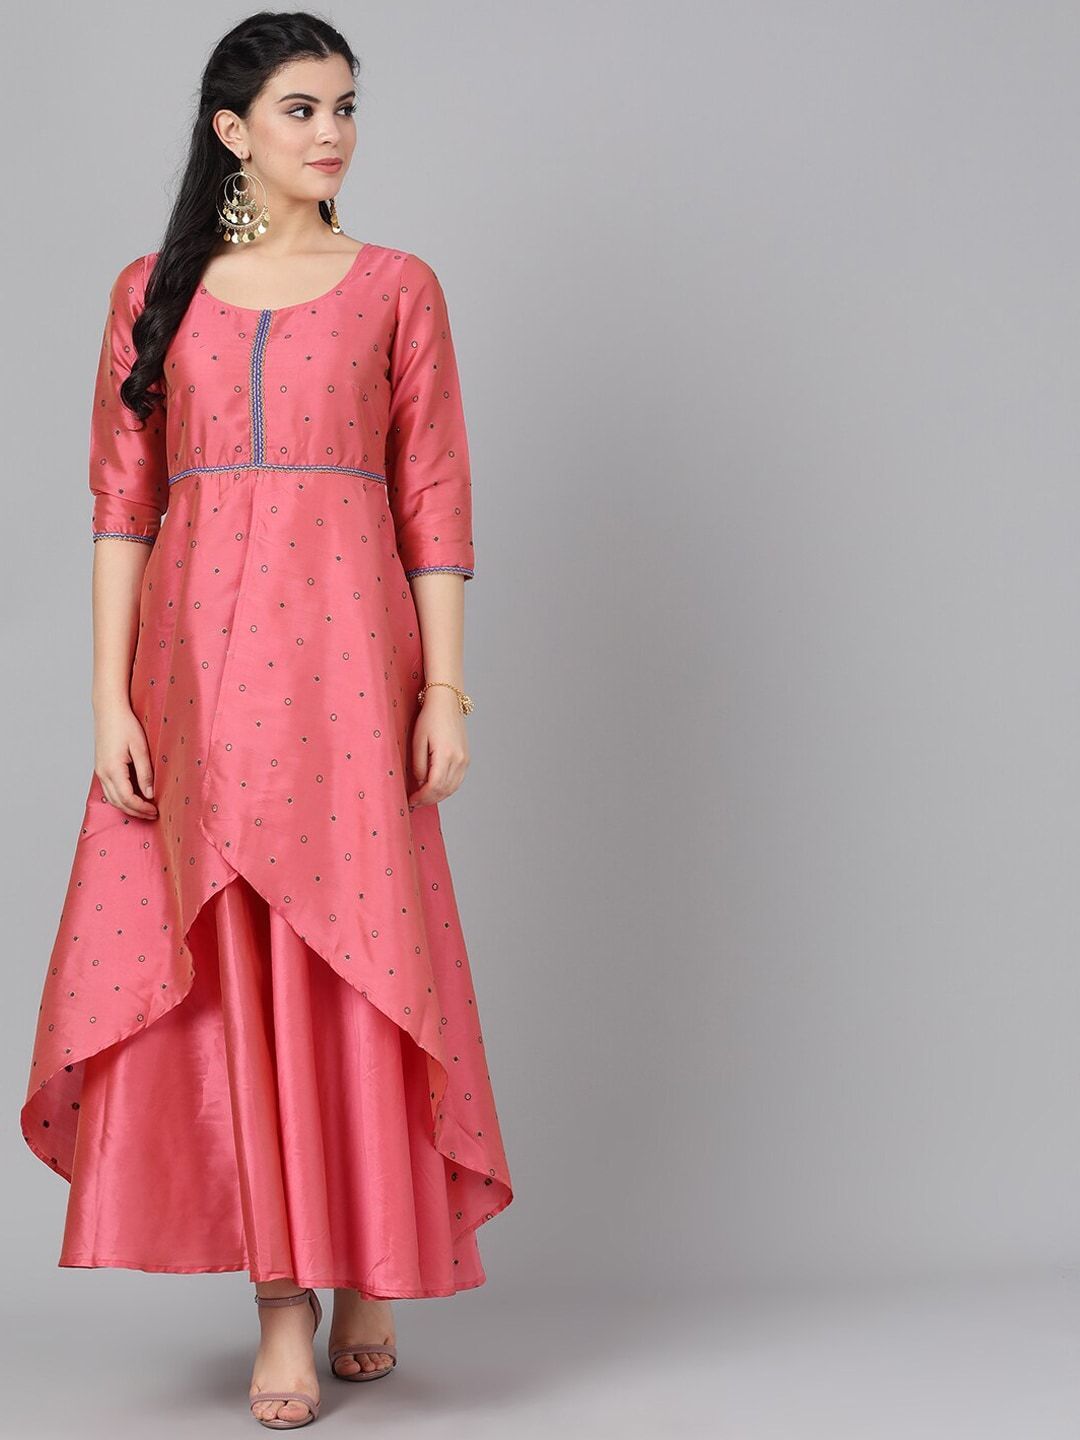 Women's  Pink Embroidered Layered Ethnic Maxi Dress - AKS